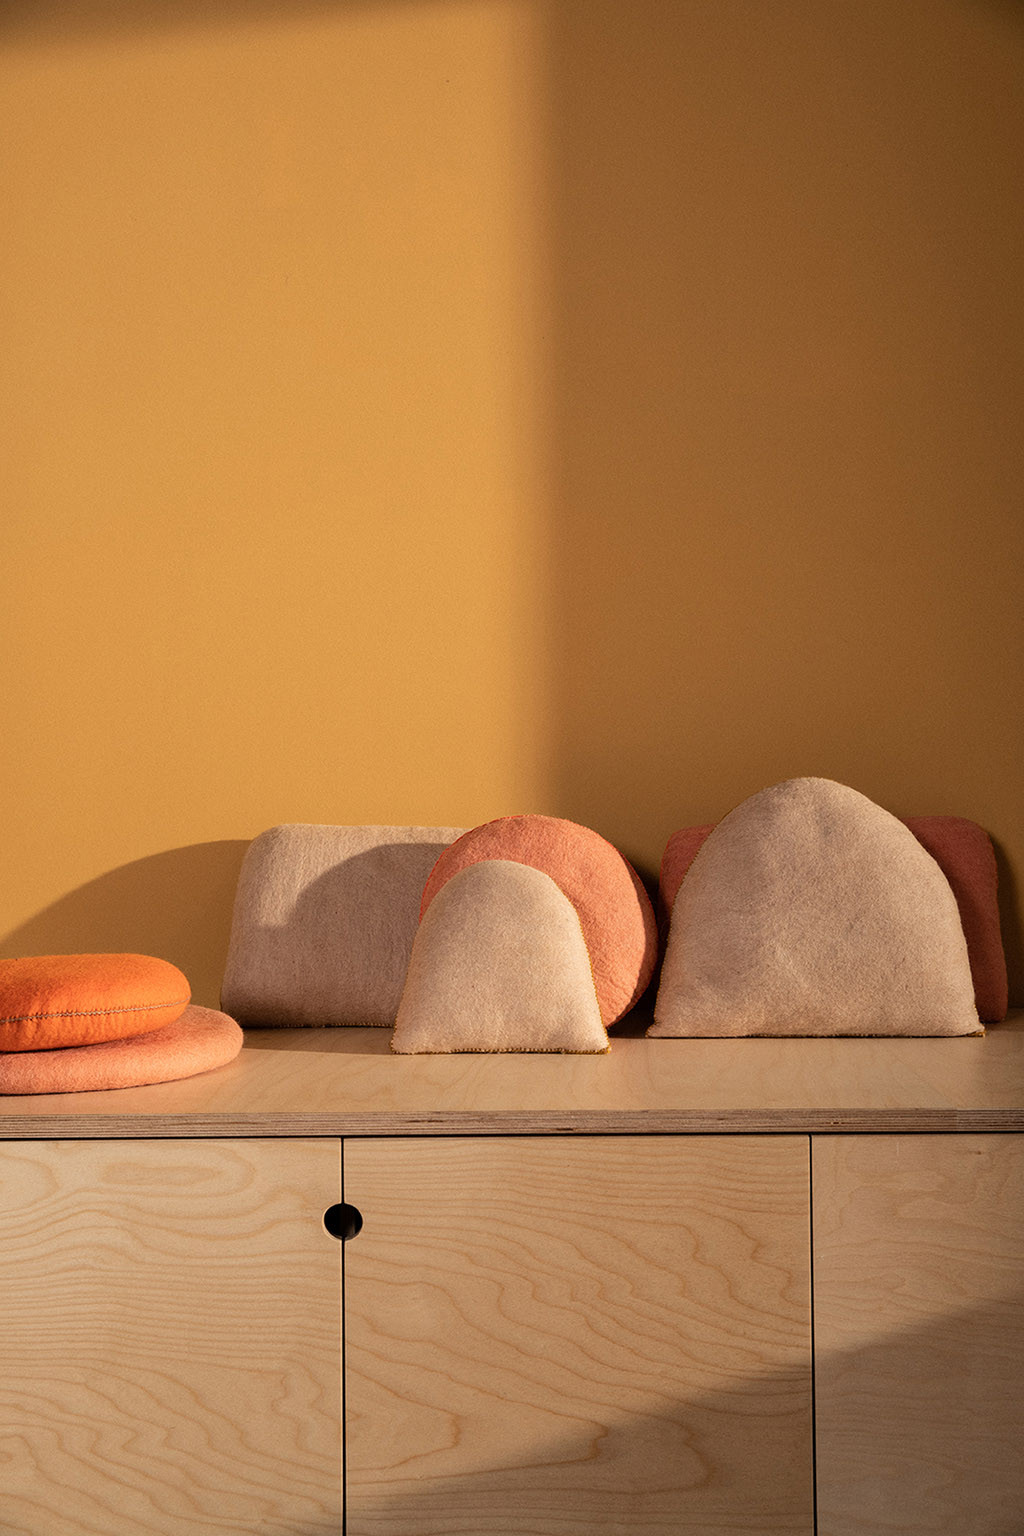 Various coloured felt cushions to decorate a wooden bench